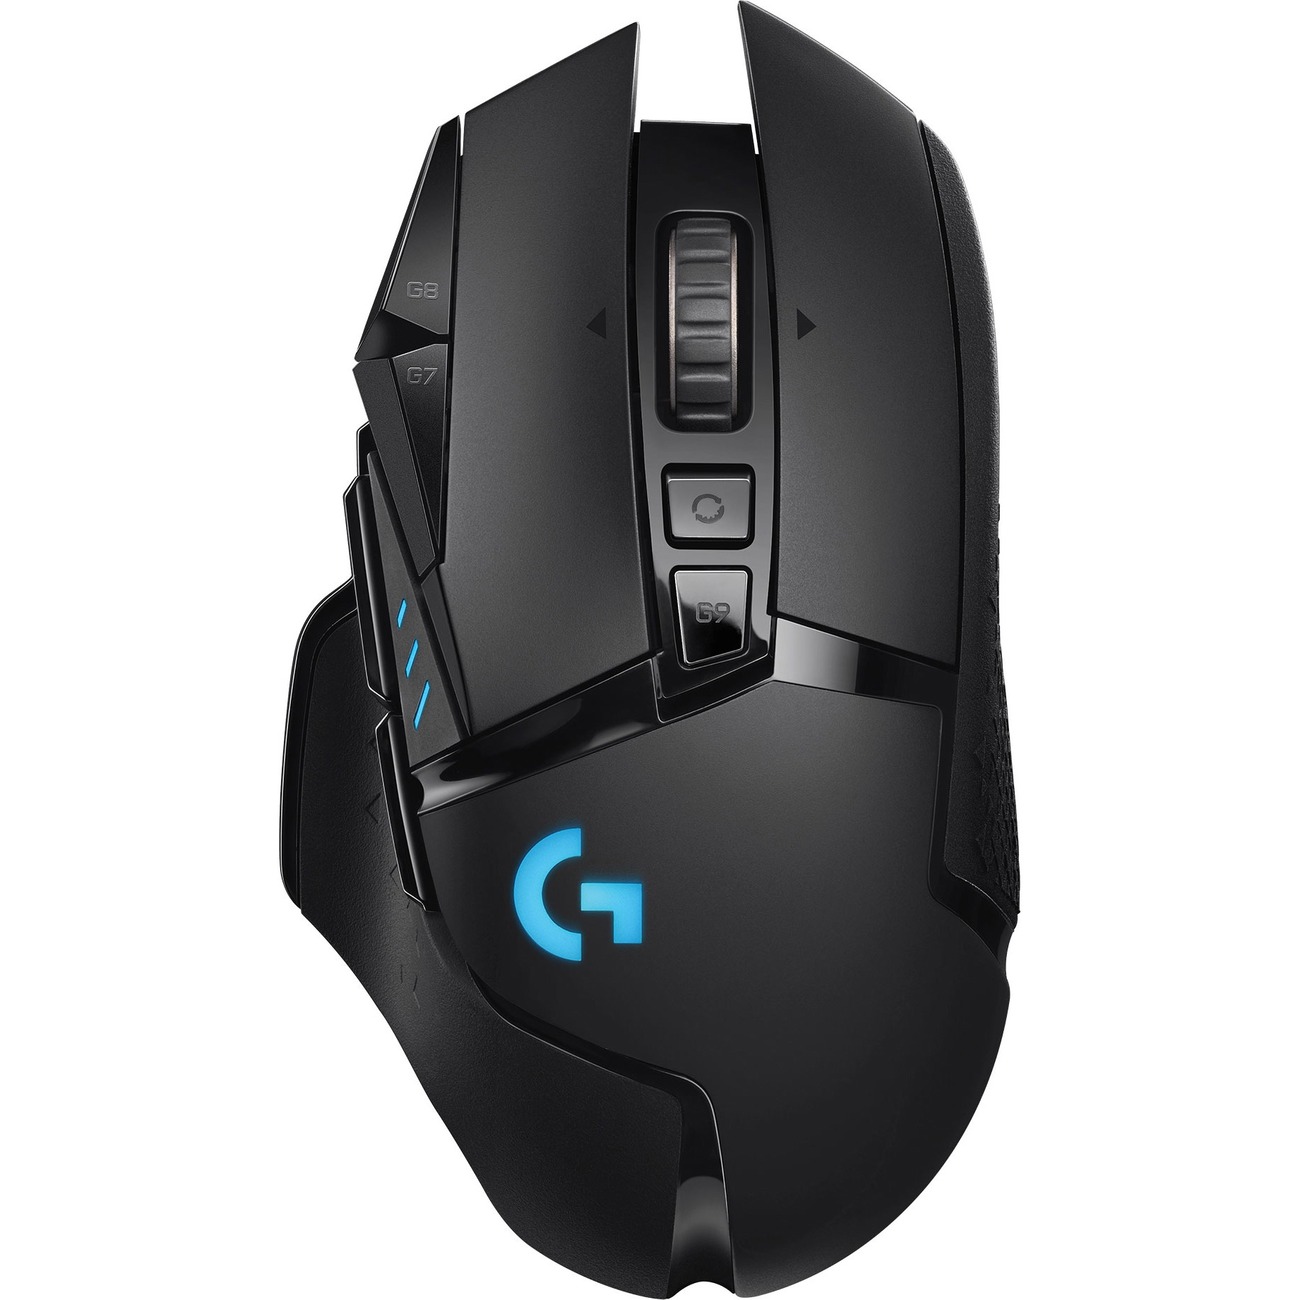 Save $60 on This Logitech G502 Mouse and Take Your Gaming to the Next Level  - CNET